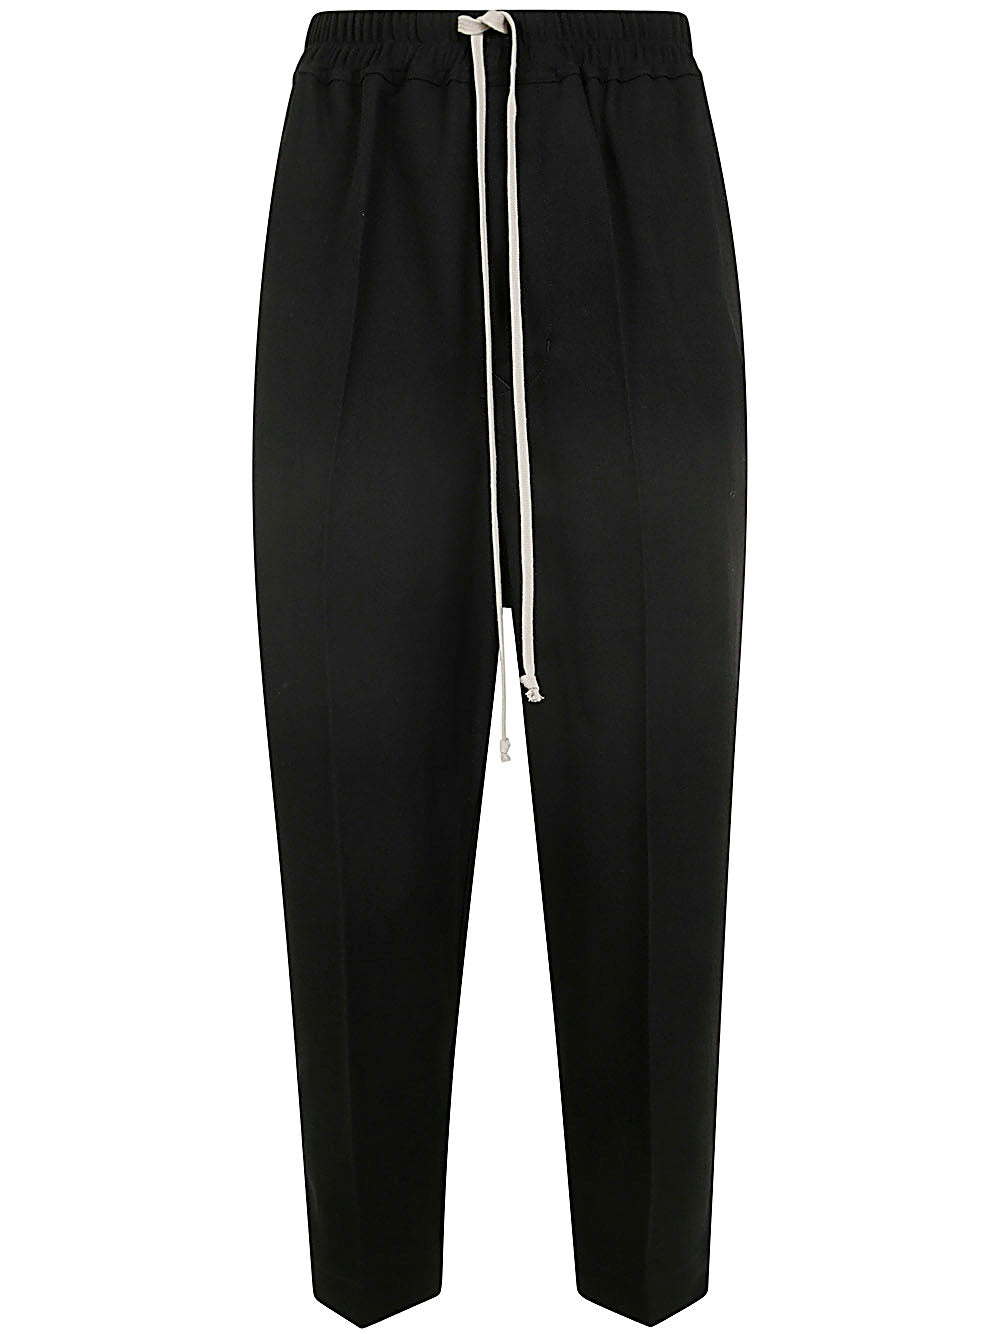 Drawstring Astaires Cropped Pants